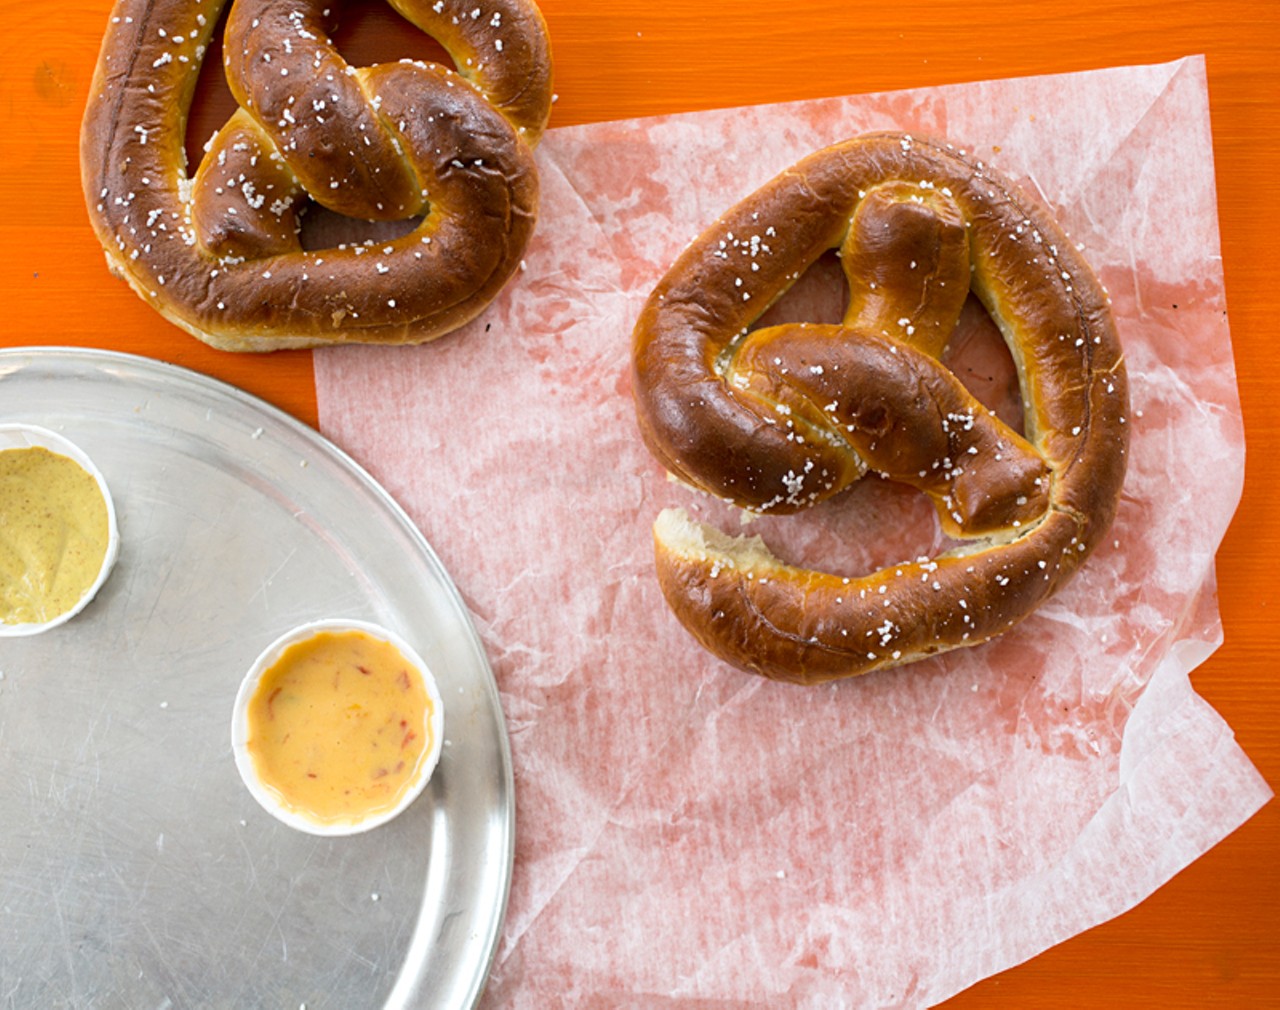 Two big soft pretzels. Buttered, salted, and toasted with dipping sauces.